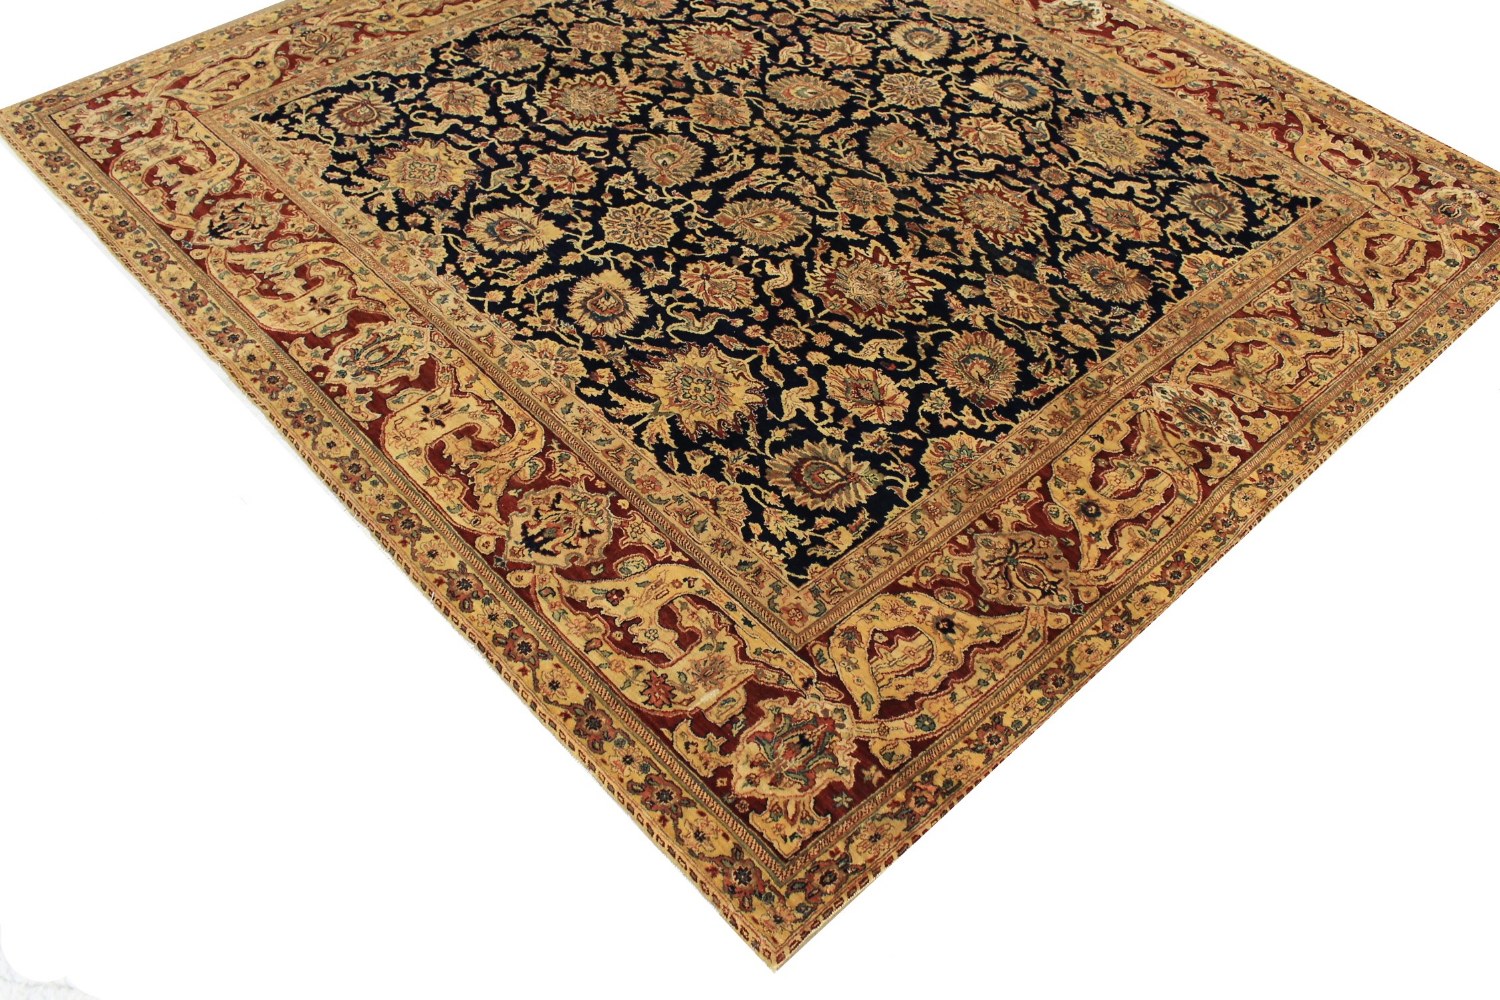 9 ft. & Over Round & Square Traditional Hand Knotted Wool Area Rug - MR024516